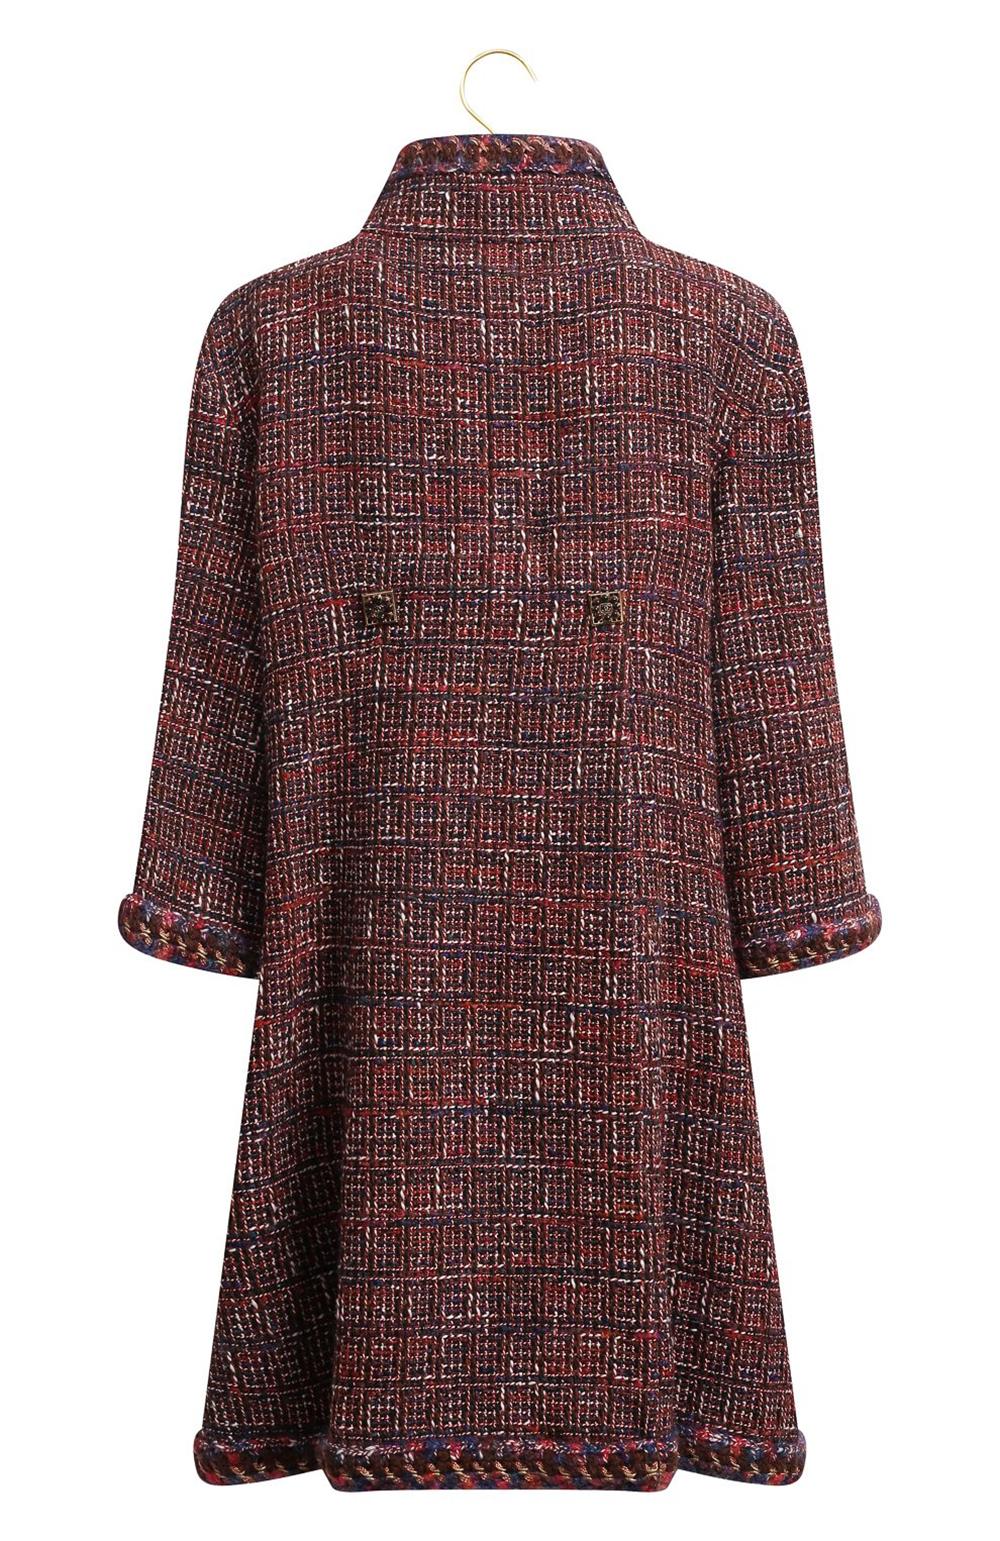 Chanel Byzance CC Jewel Buttons Runway Coat 4